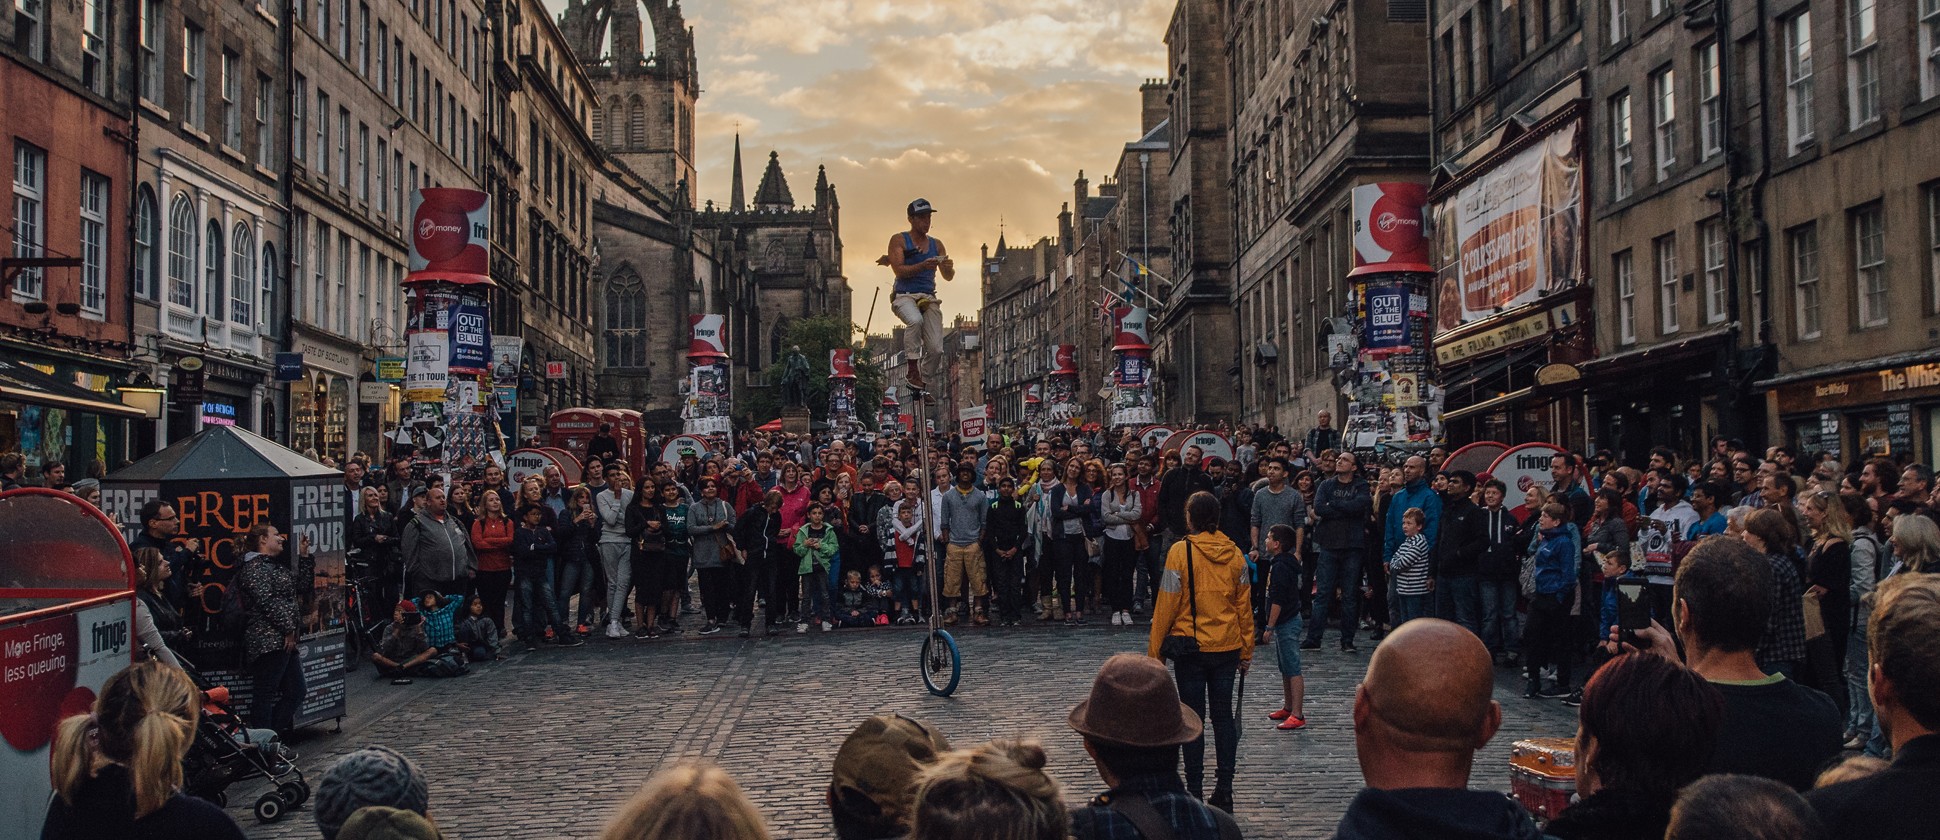 Why the Fringe festival in Edinburgh is such a big cultural event?